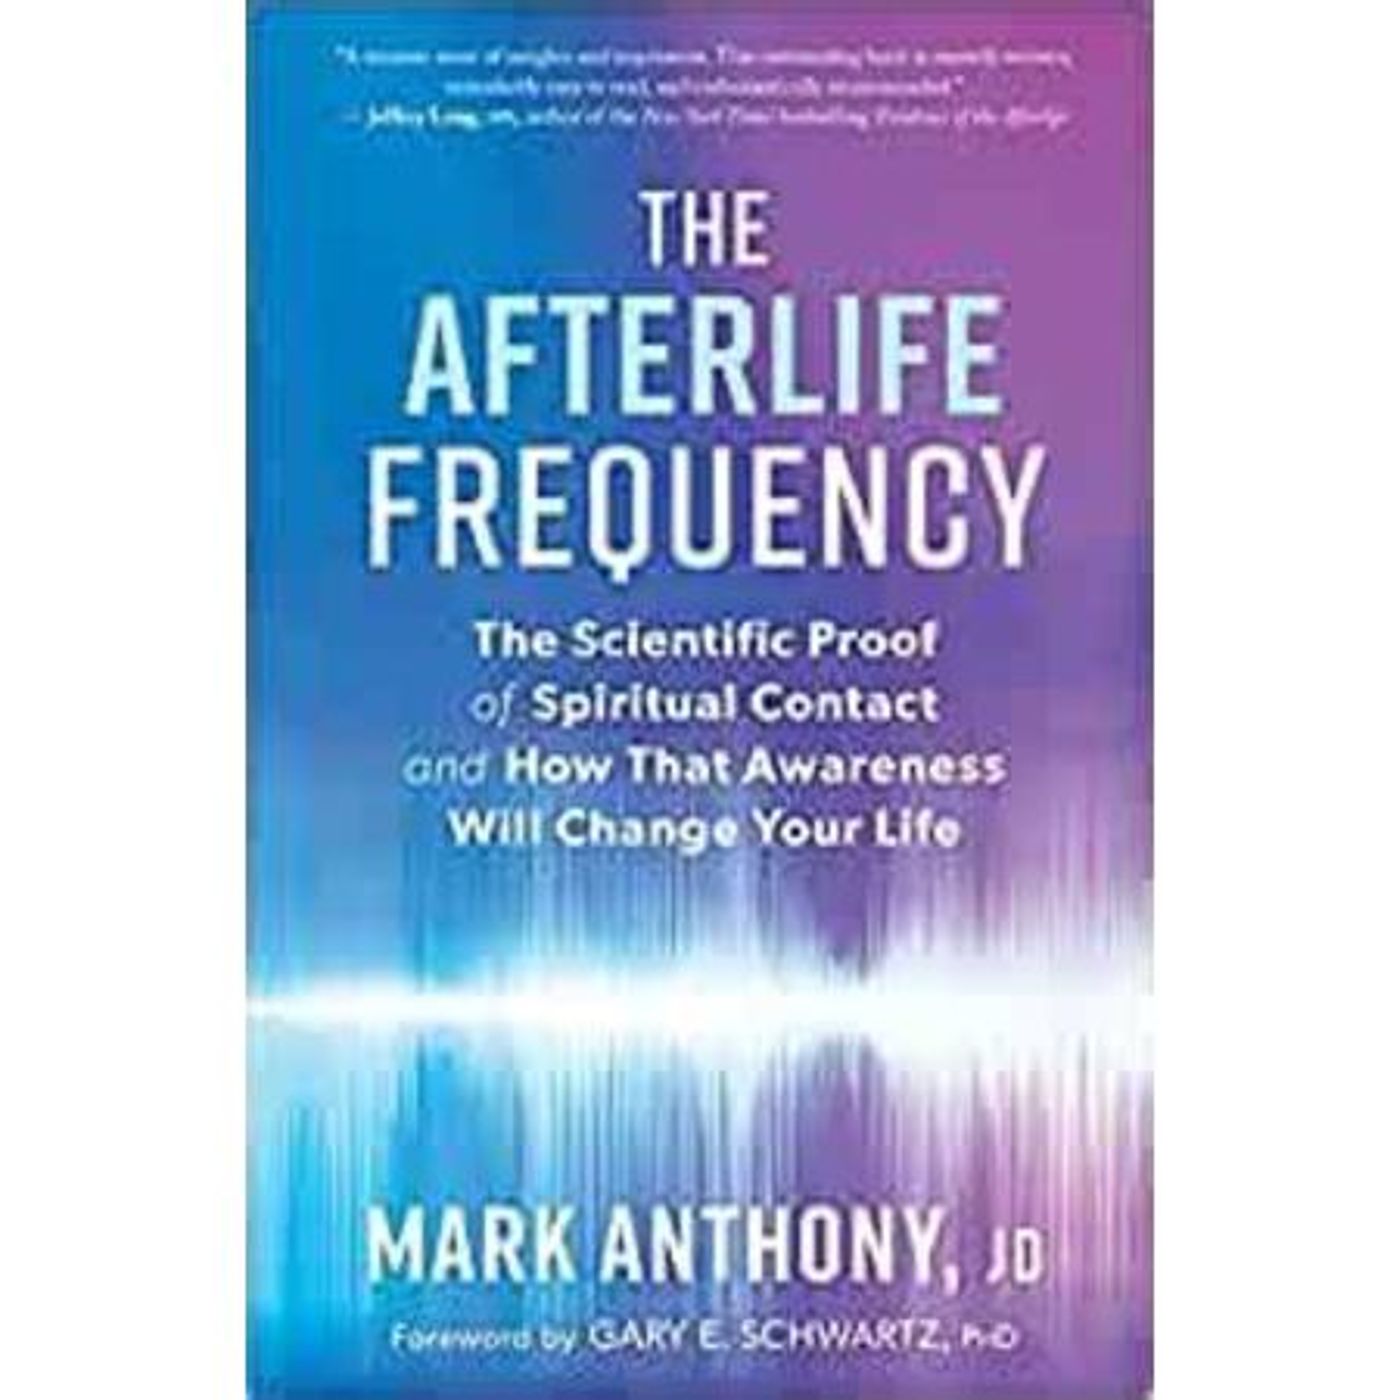 The Aferlife Frequency with the Psychic Lawyer Mark Anthony, JD